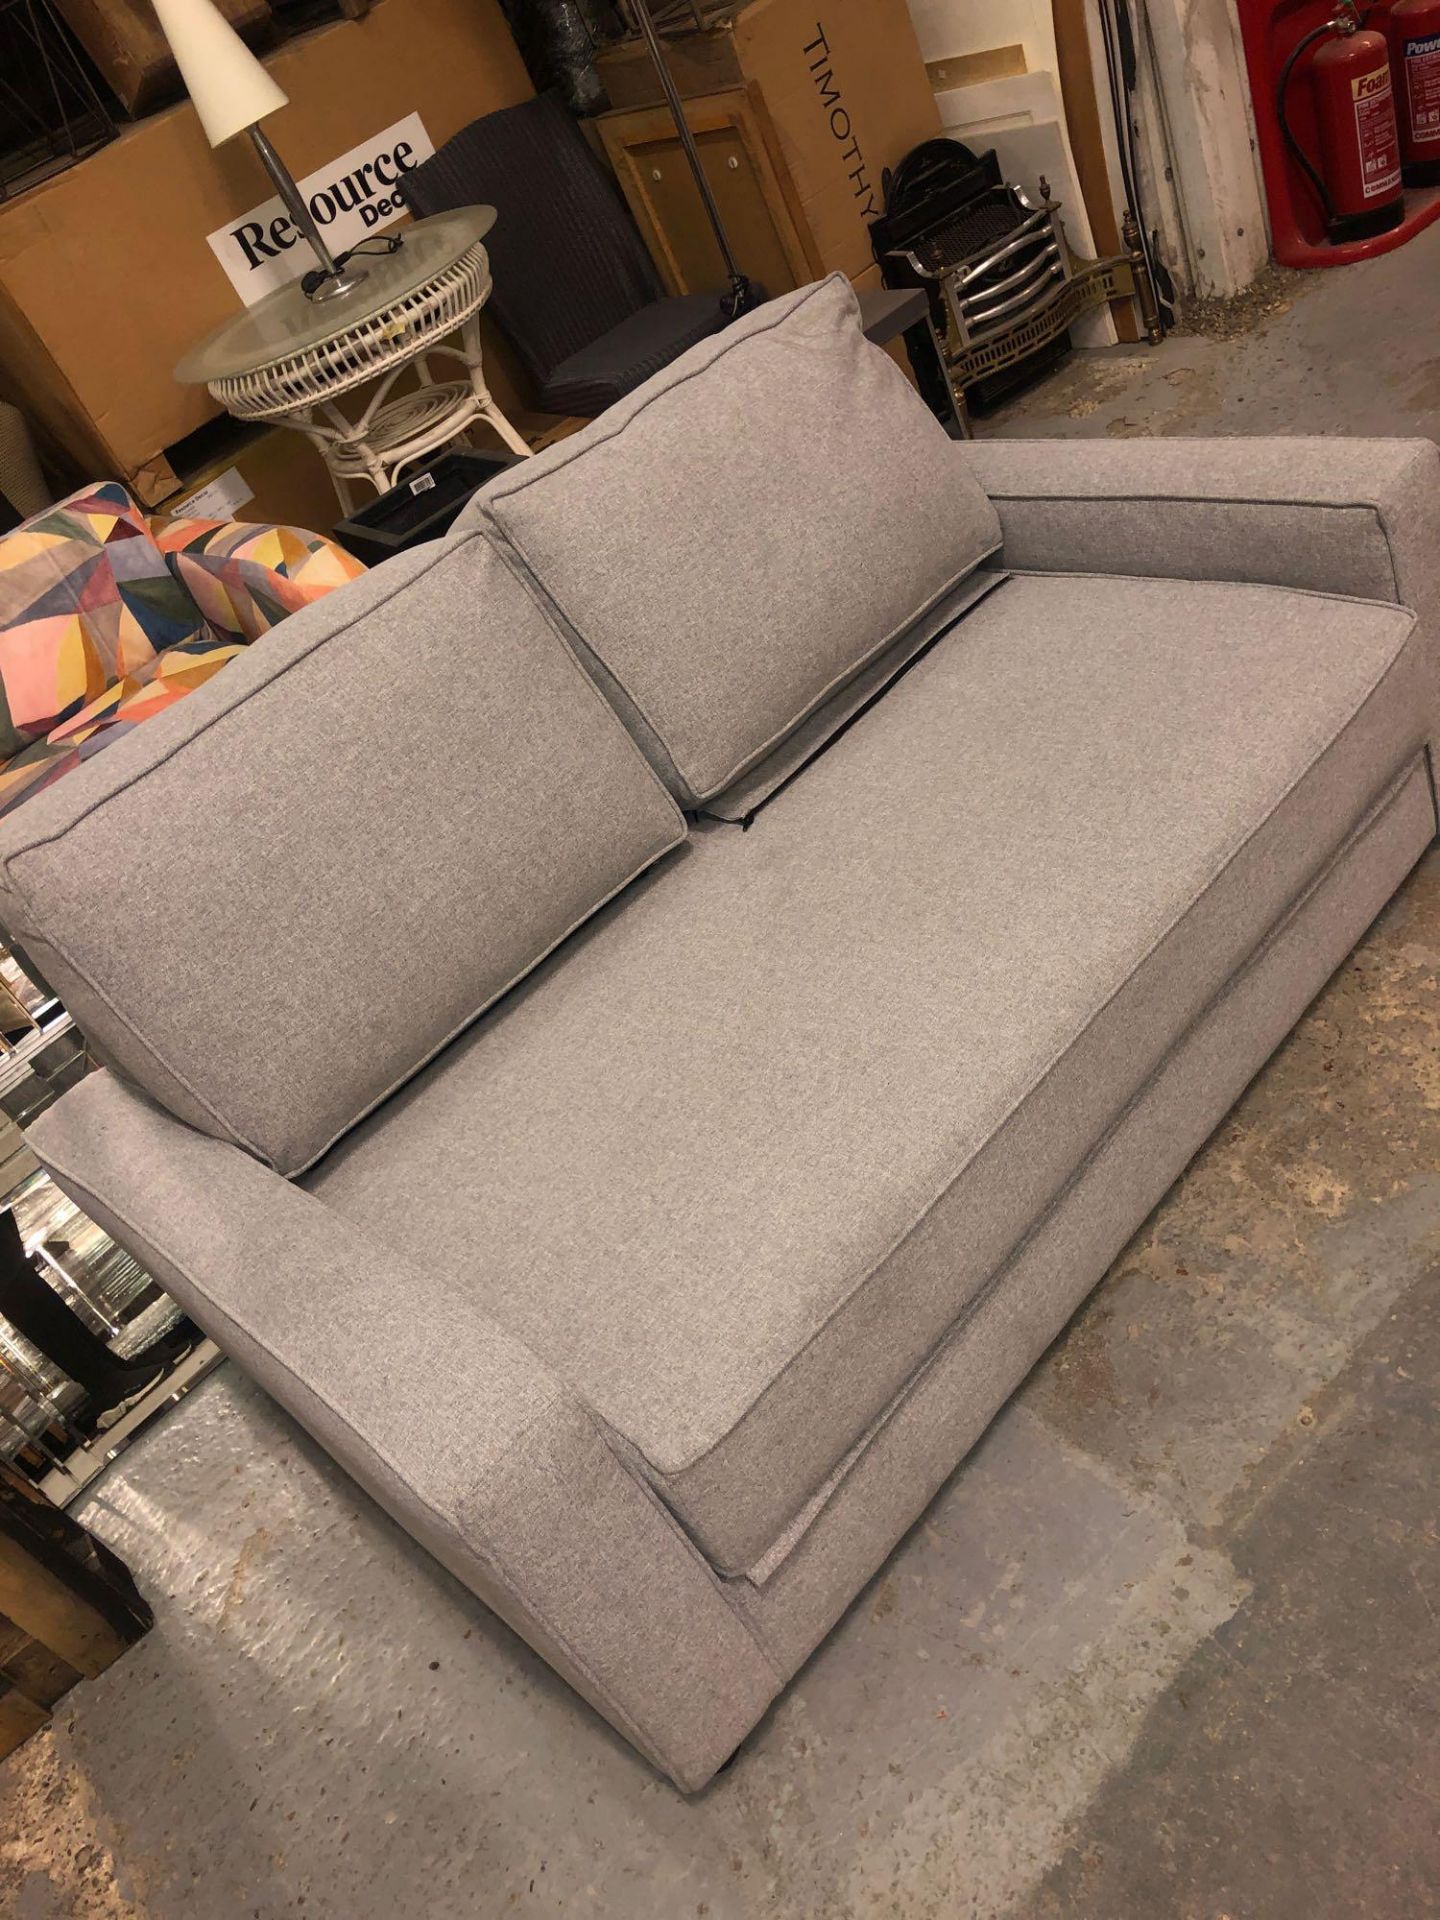 Eastwood Sofabed 150 1660 x 1000 x 880mm - Image 2 of 2